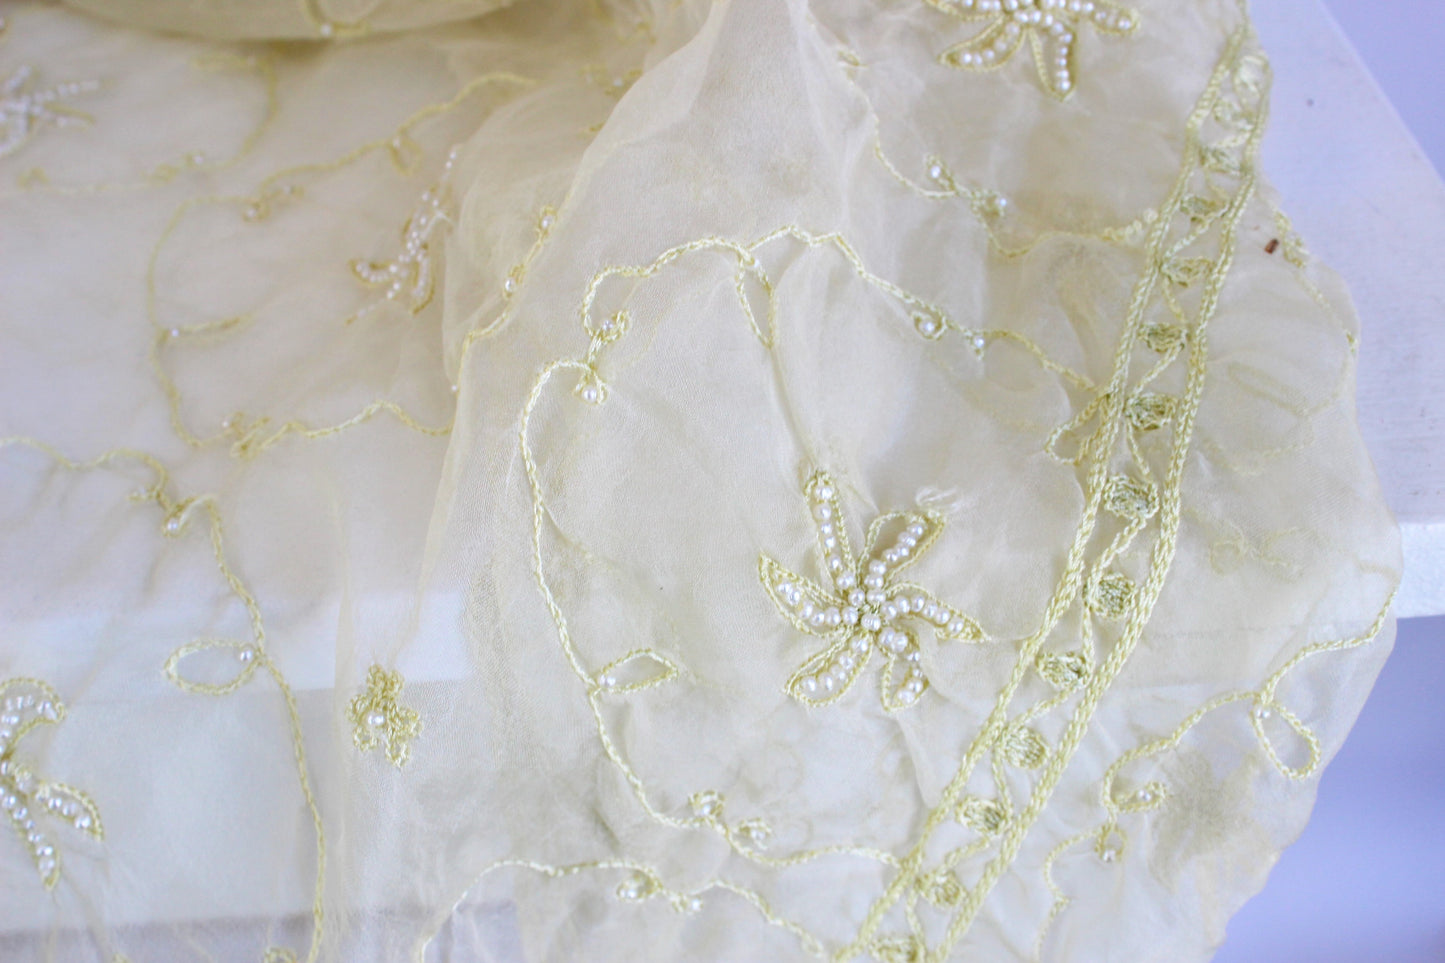 Vintage 1990s Indian Green Organza or Organdy Square Tablecloth With Pearls And Floral Embroidery